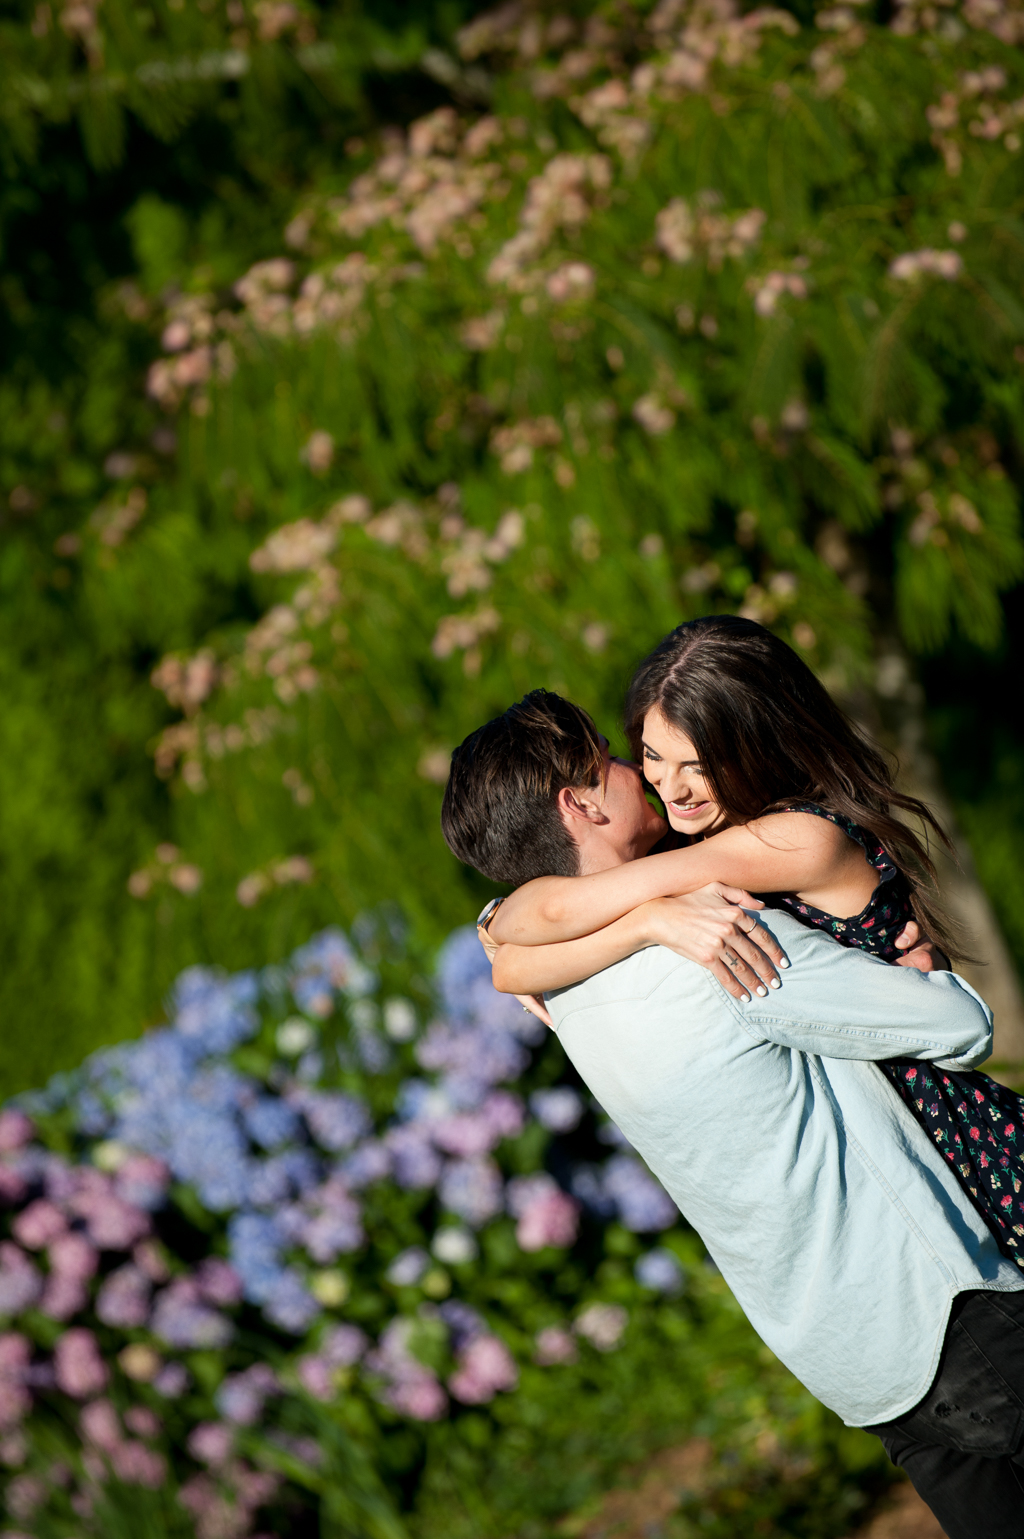 a man picks up a girl and swings her around in front of purple hydrangeas and a mimosa tree